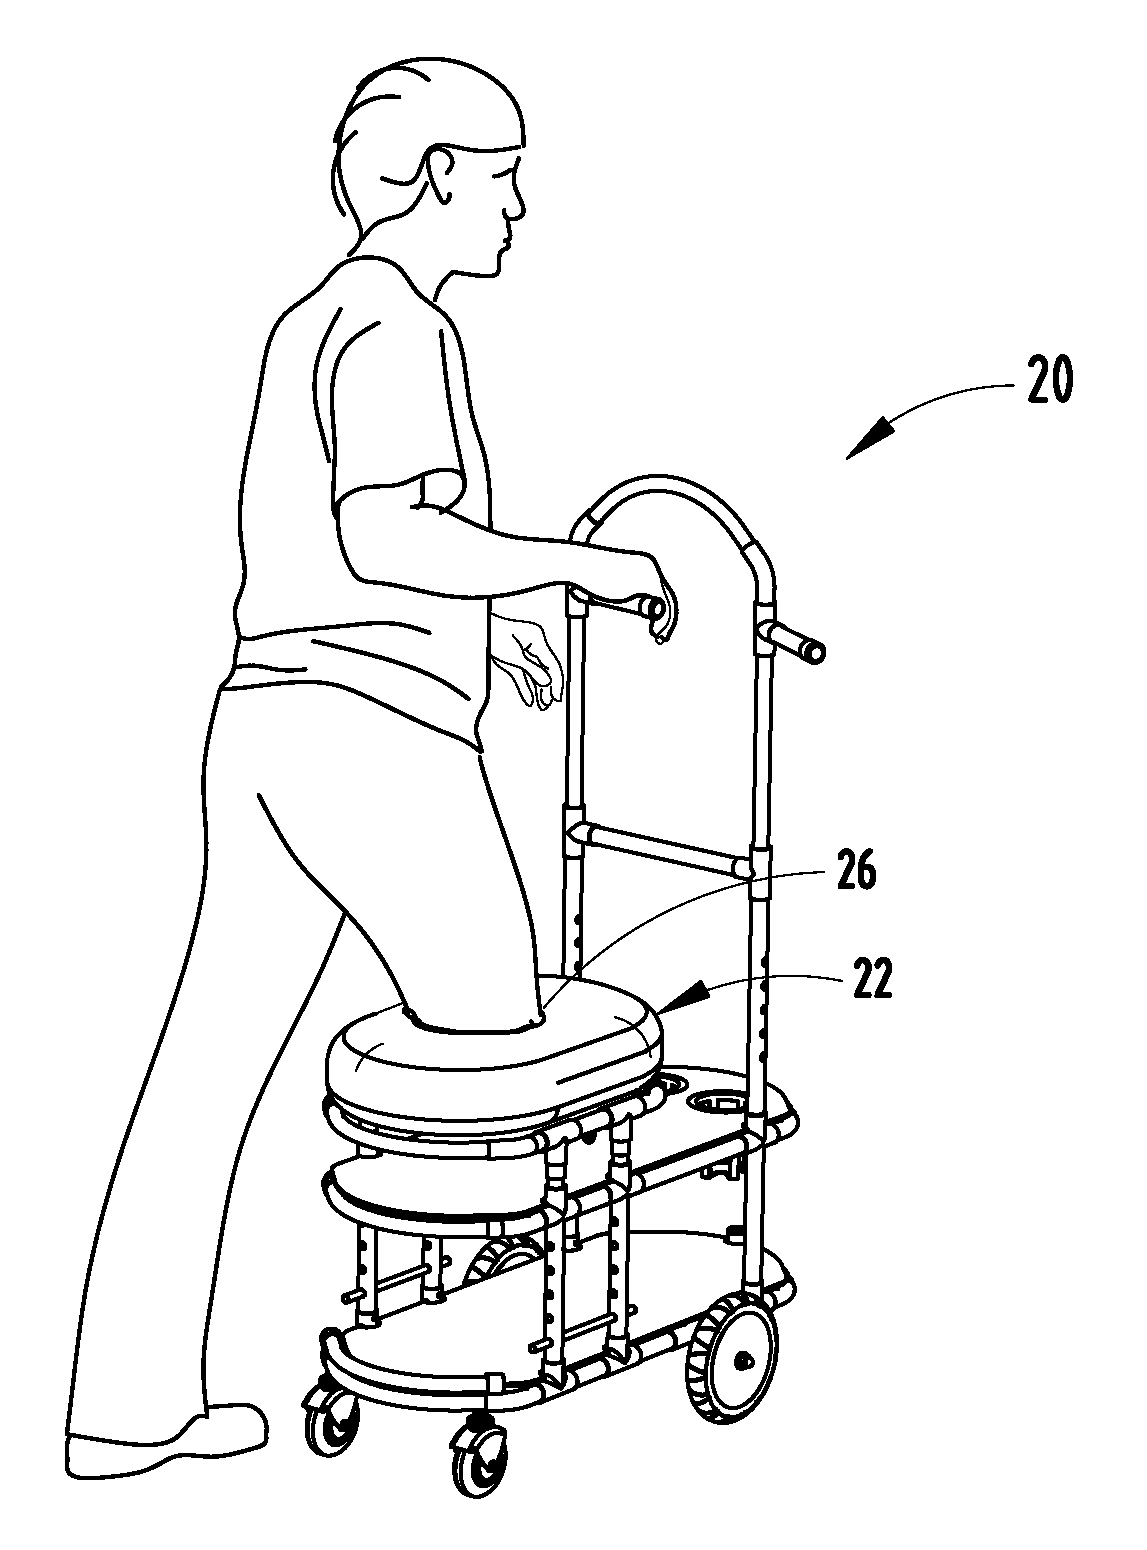 Mobility device for amputee and leg-injured persons